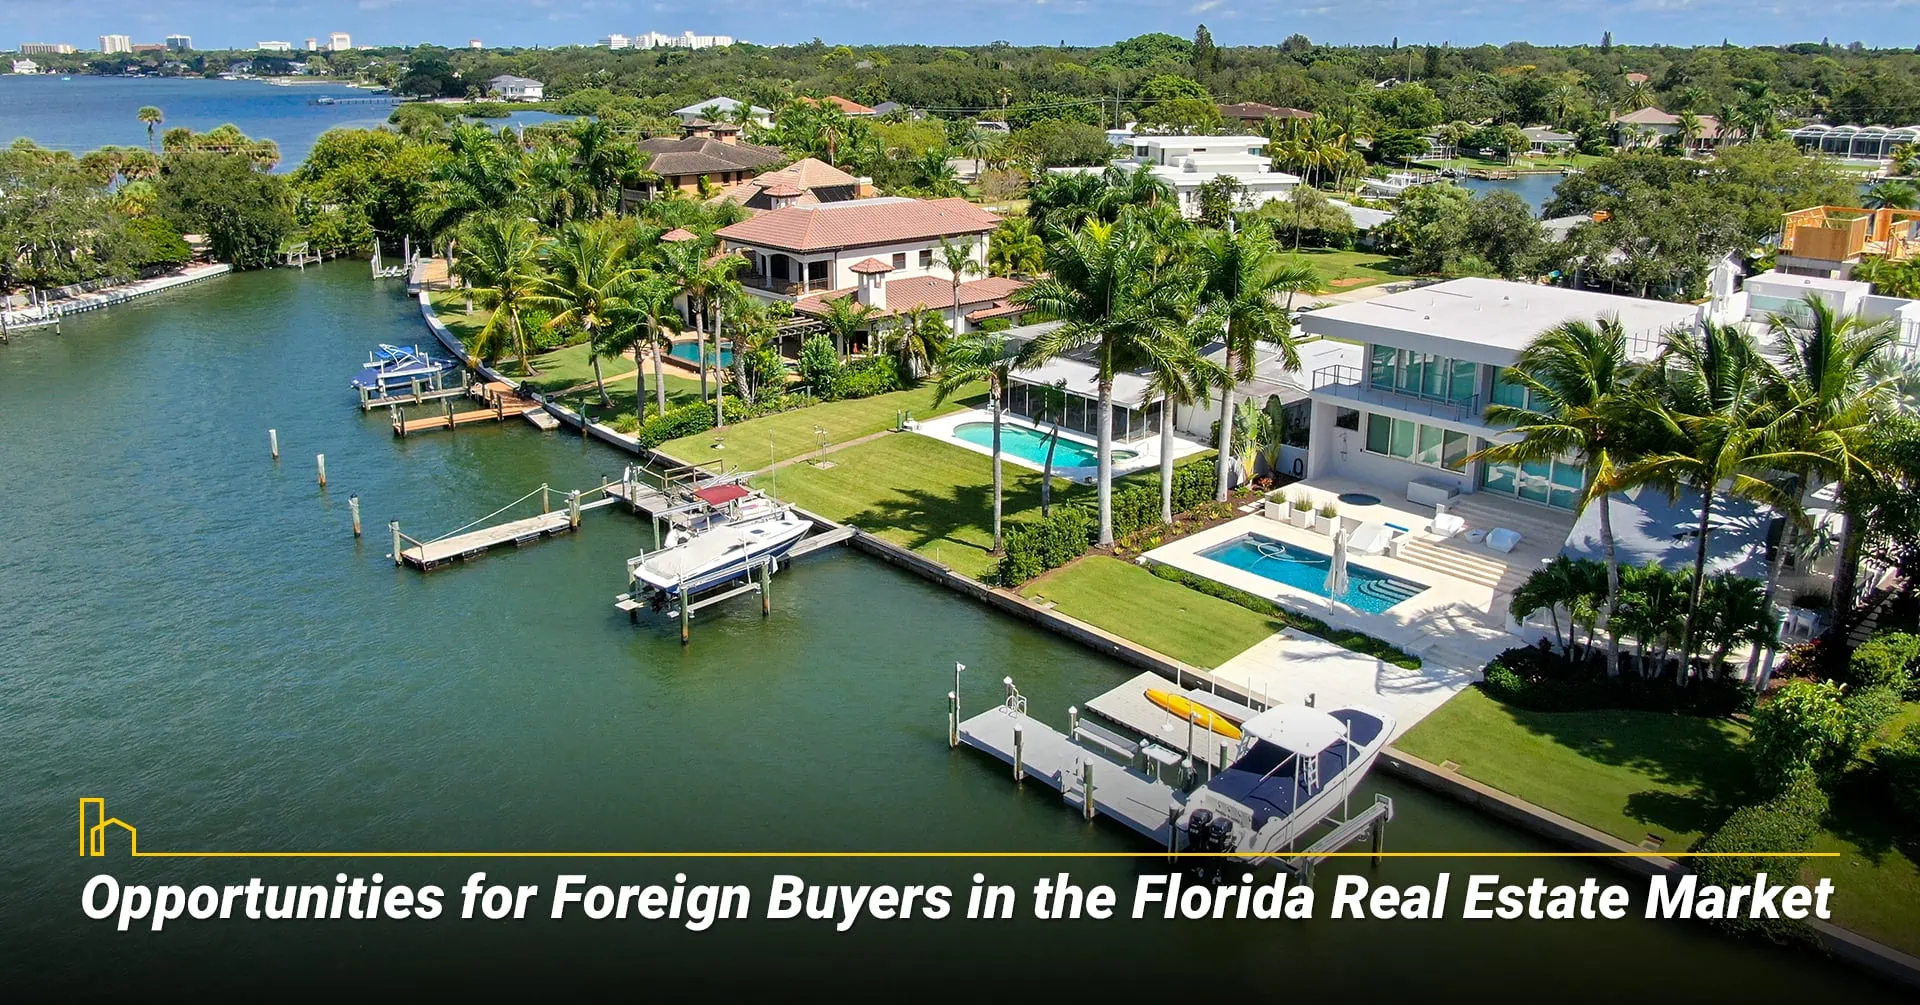 Opportunities for Foreign Buyers in the Florida Real Estate Market